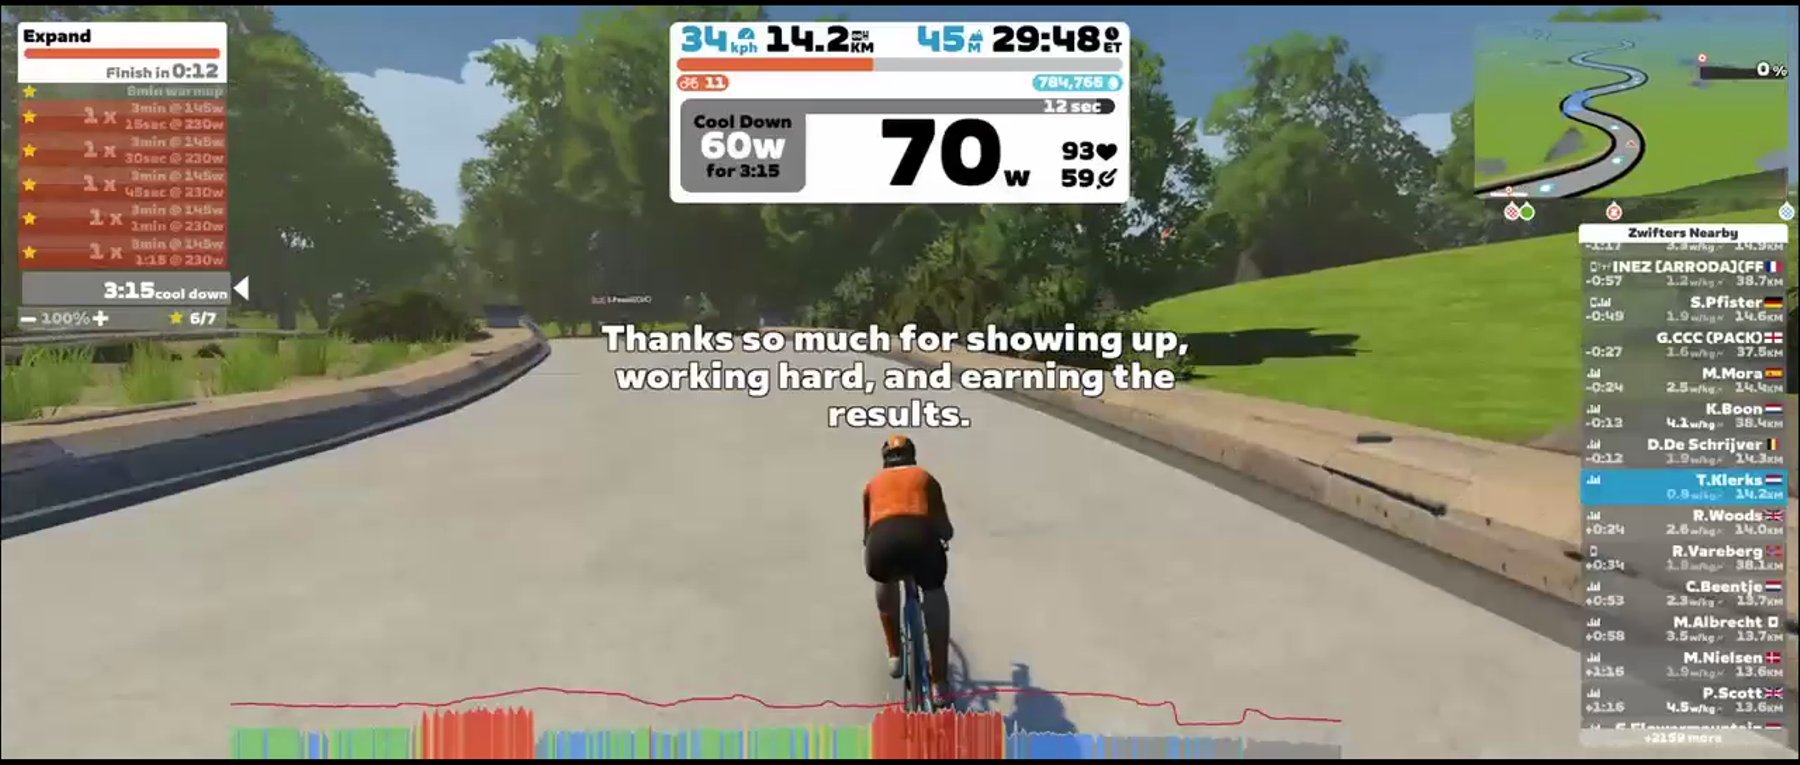 Zwift - Expand in France